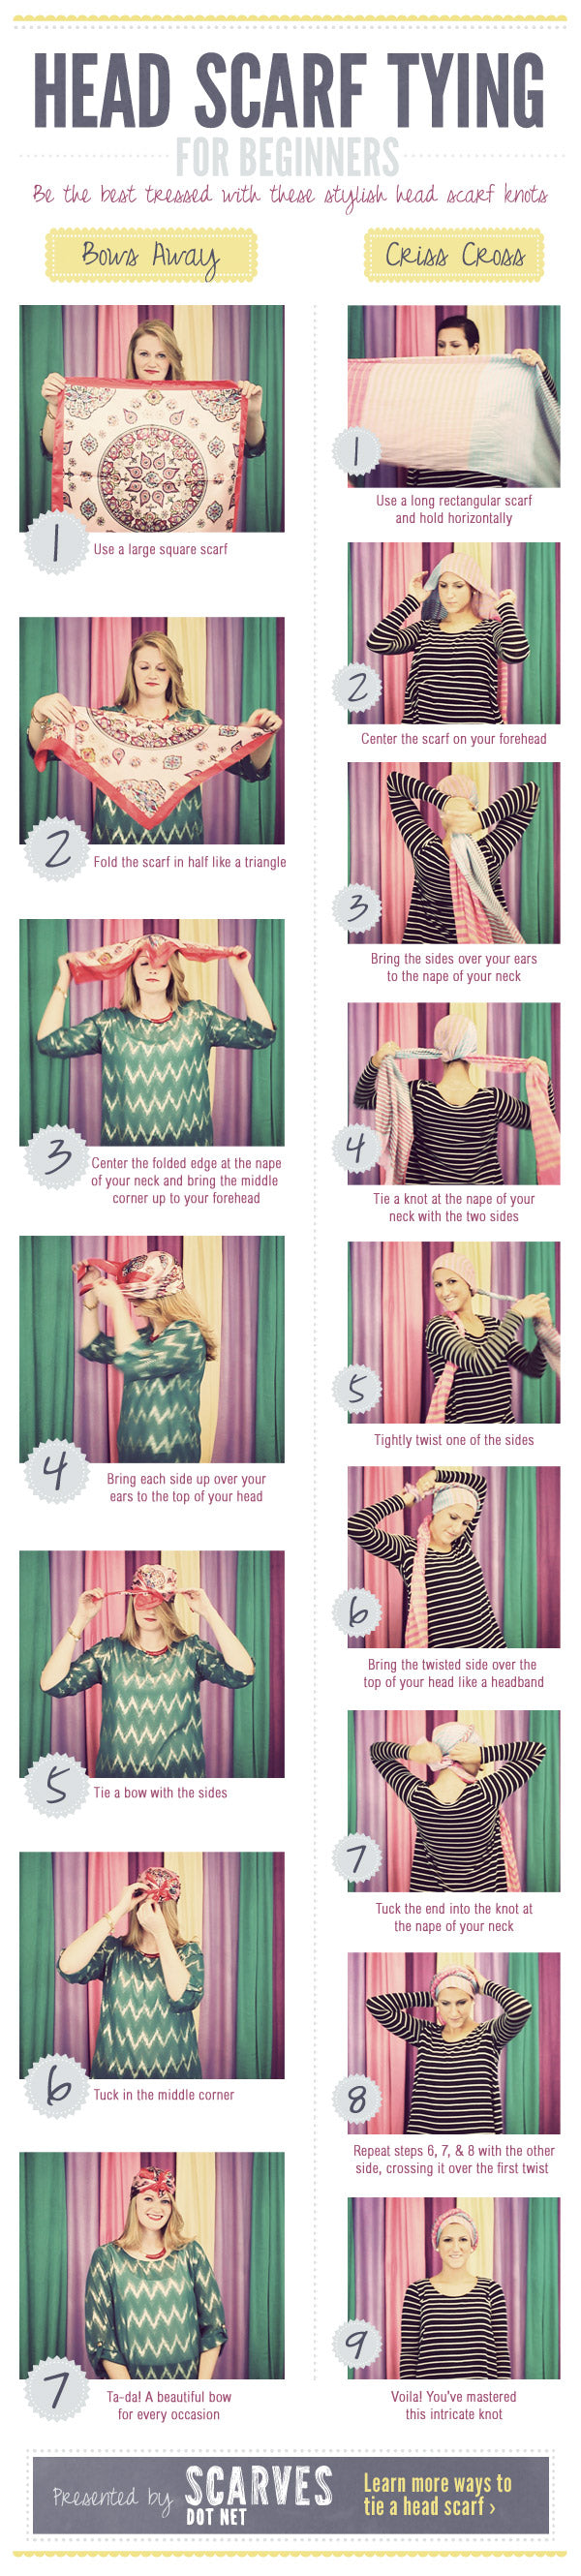 how-to-tie-a-head-scarf